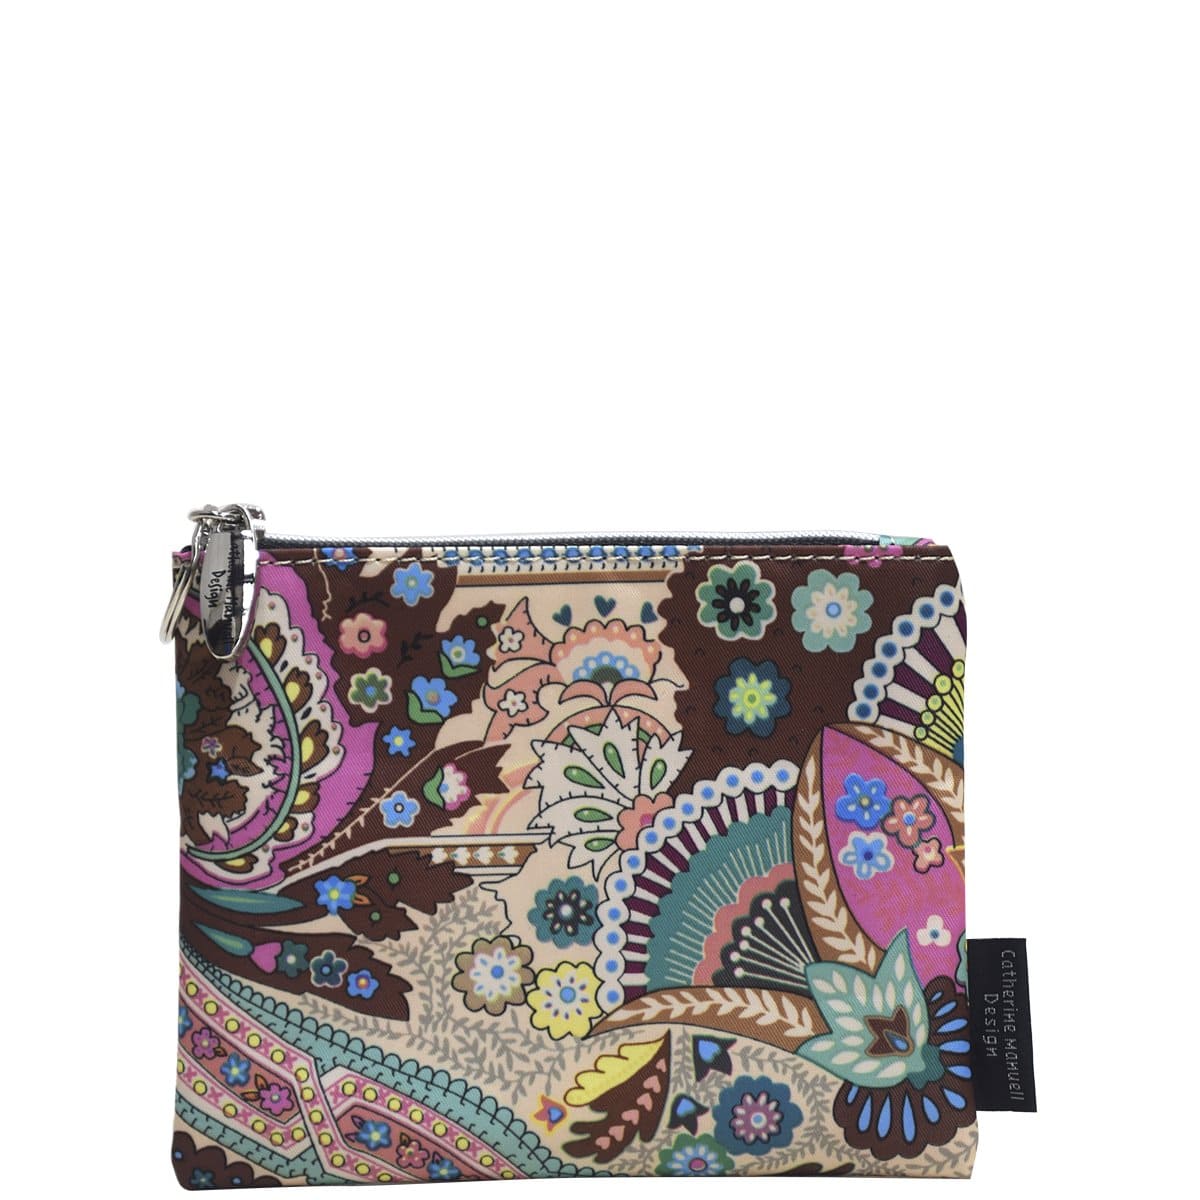 Everyday Purse - Pink Green Blue Paisley